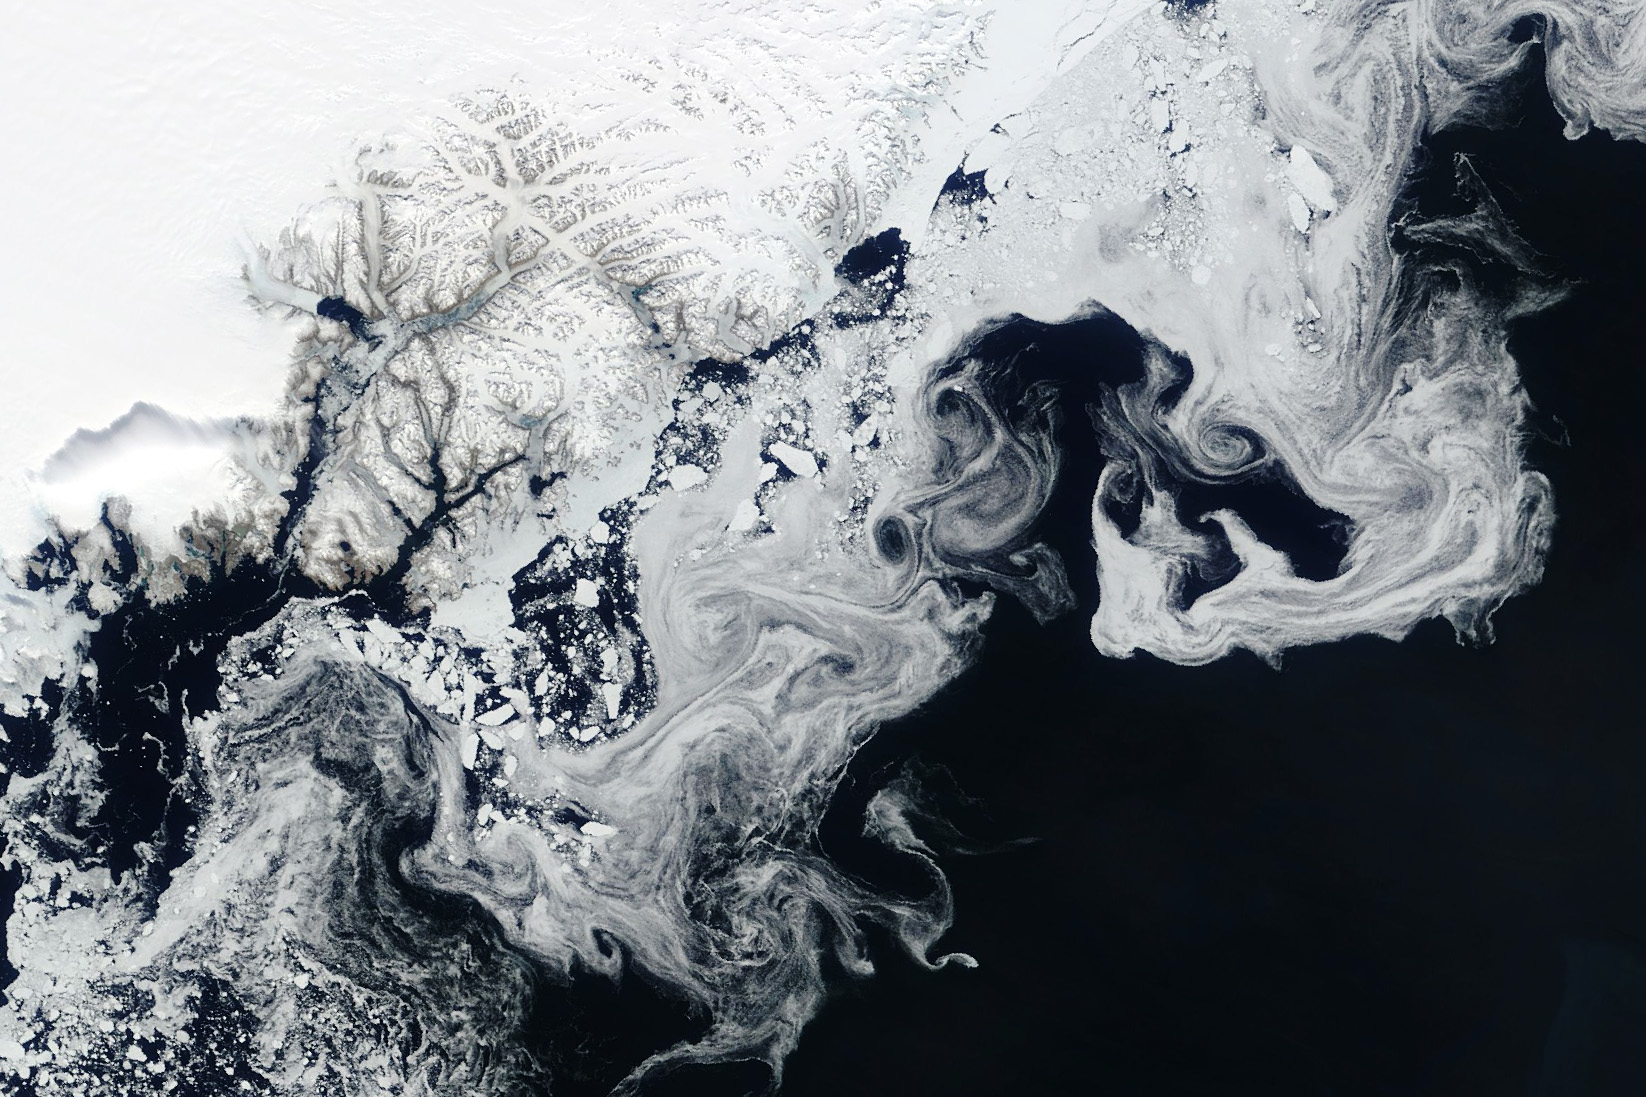 A satellite view of sea ice. The ice is white and solid at top left, while the edges swirl and swoop through the dark blue water.